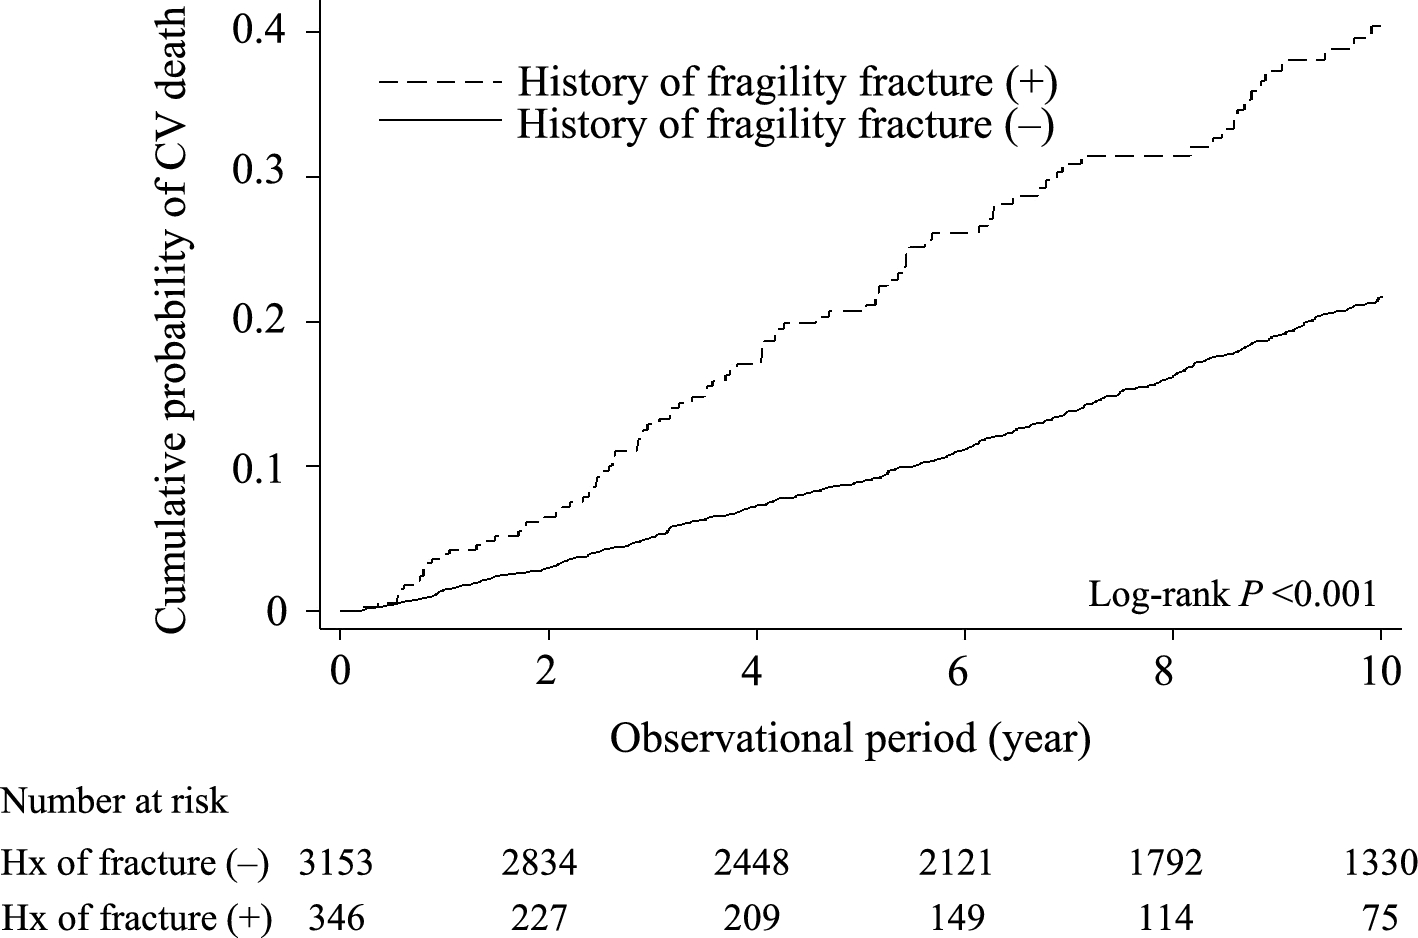 History of fragility fracture is associated with cardiovascular mortality in hemodialysis patients: the Q-Cohort study